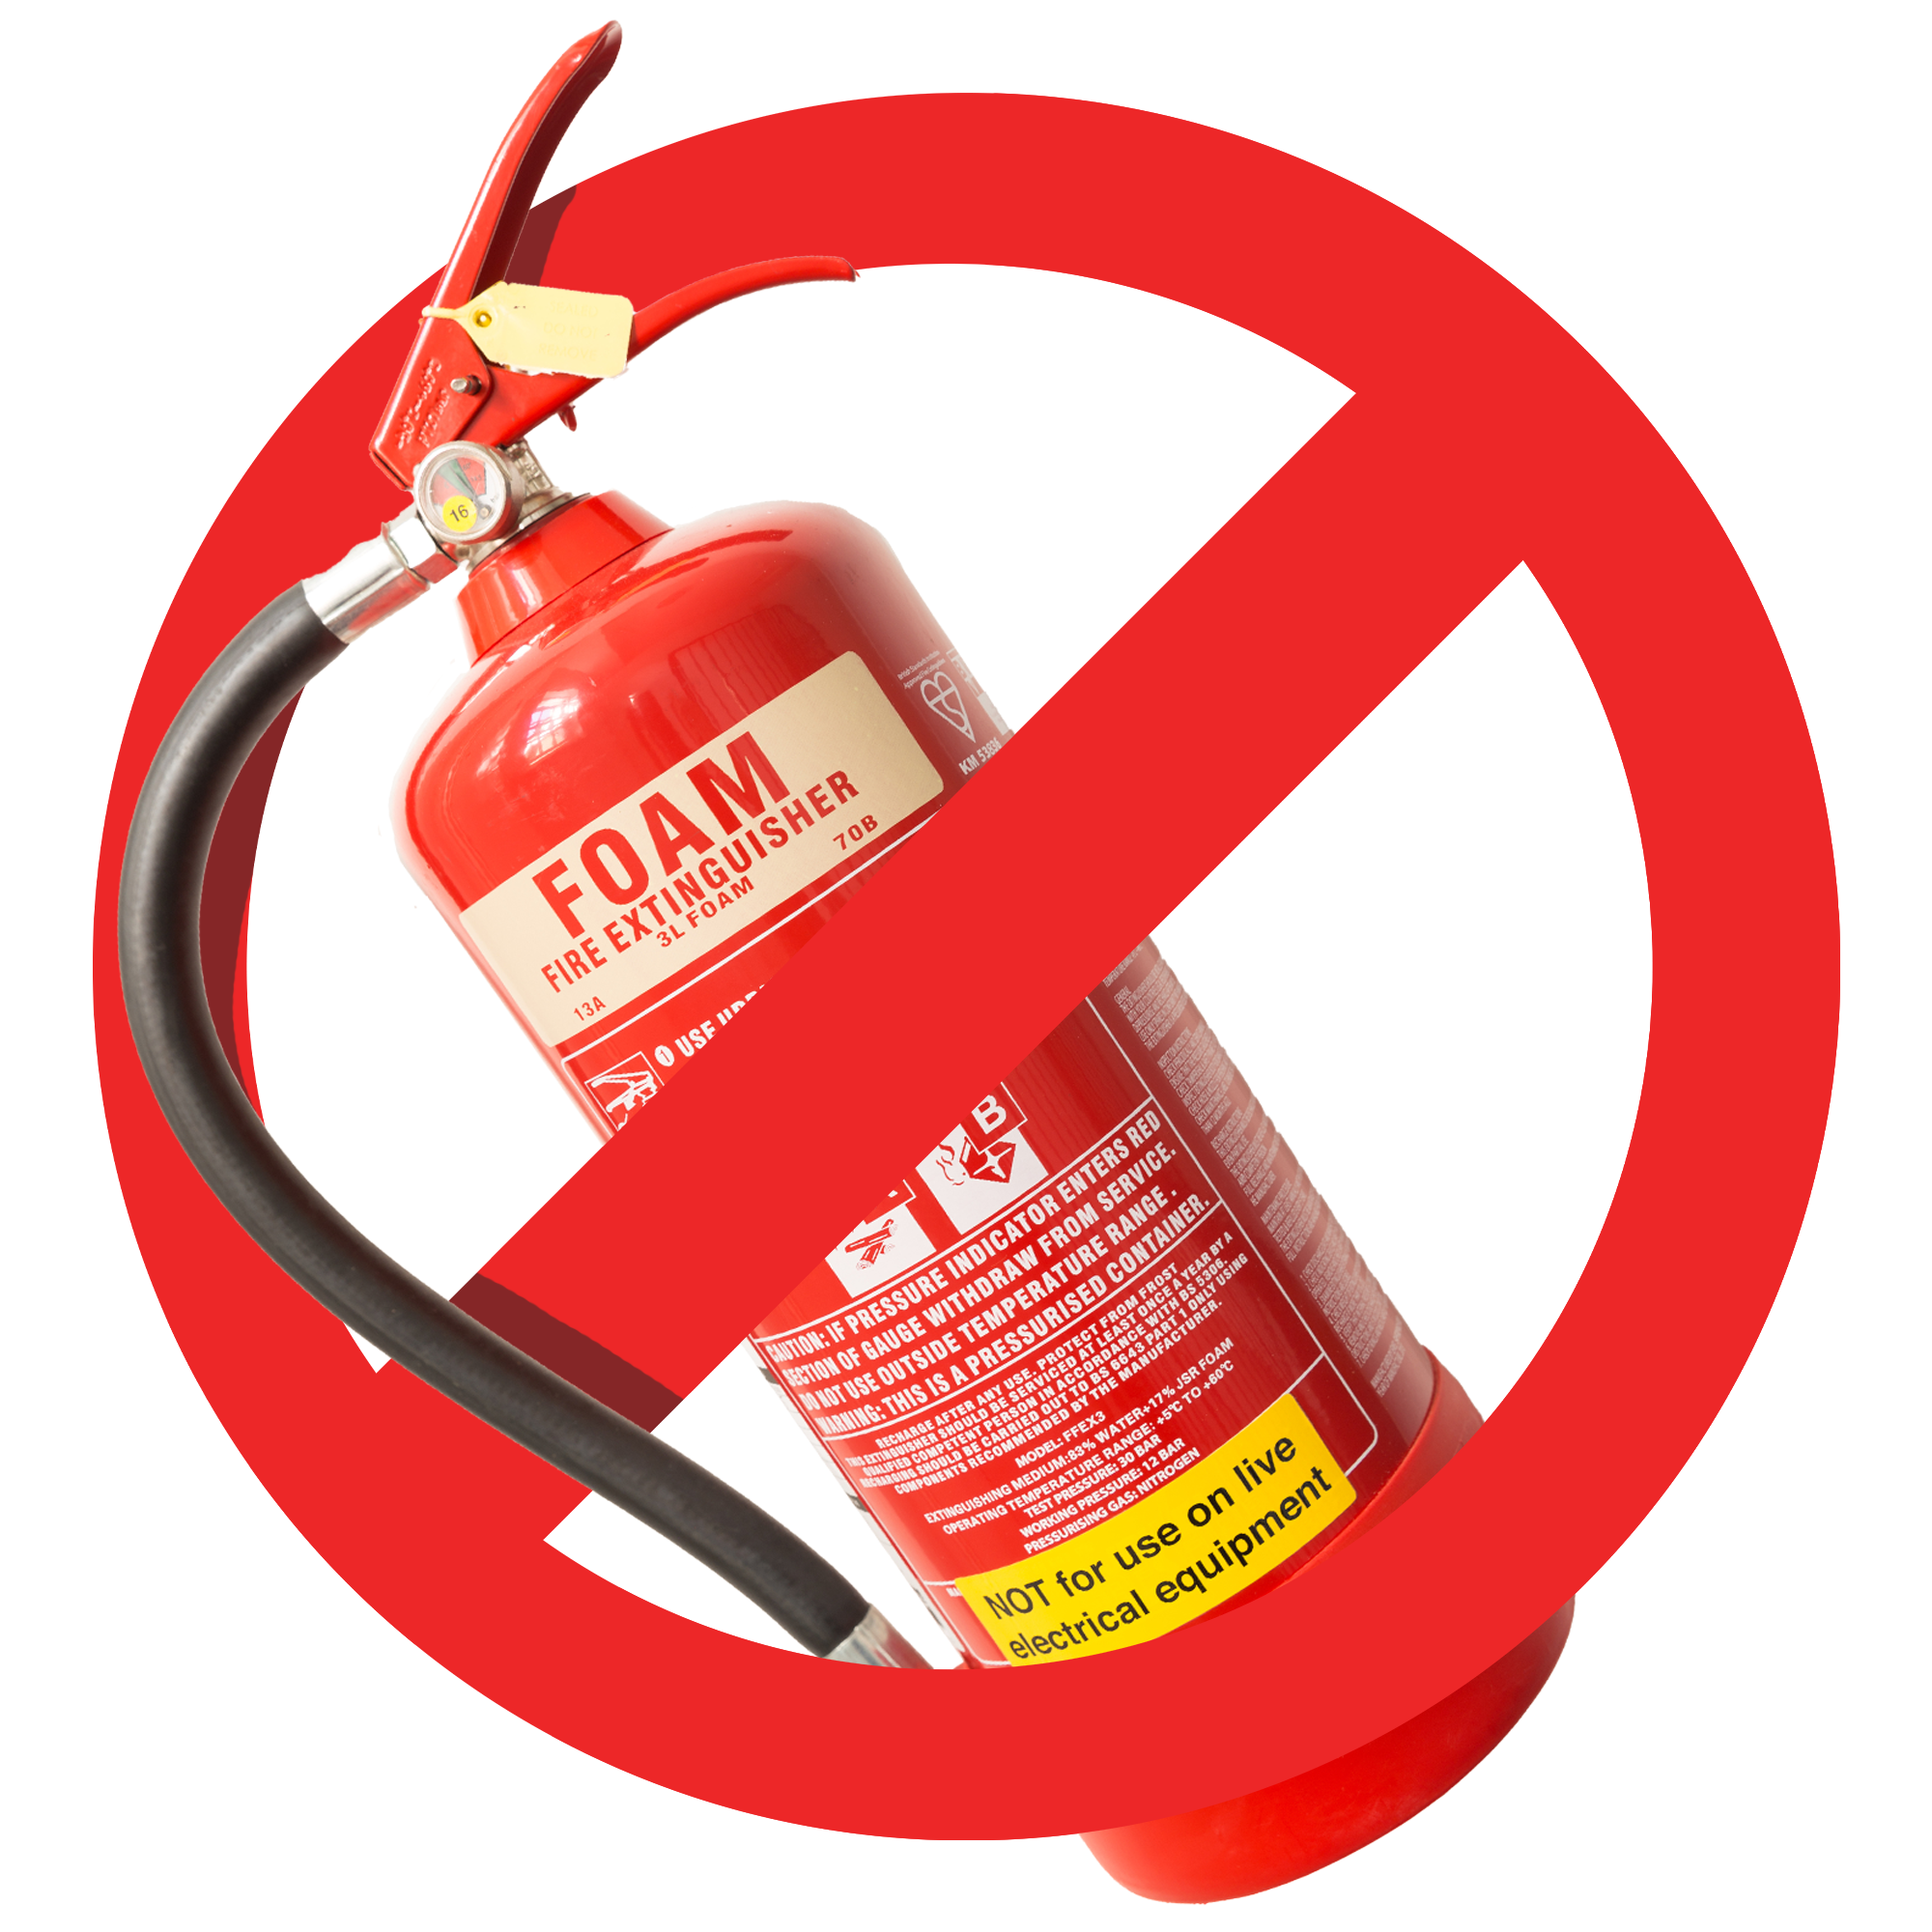 What To Do After You've Used A Fire Extinguisher - All Protect